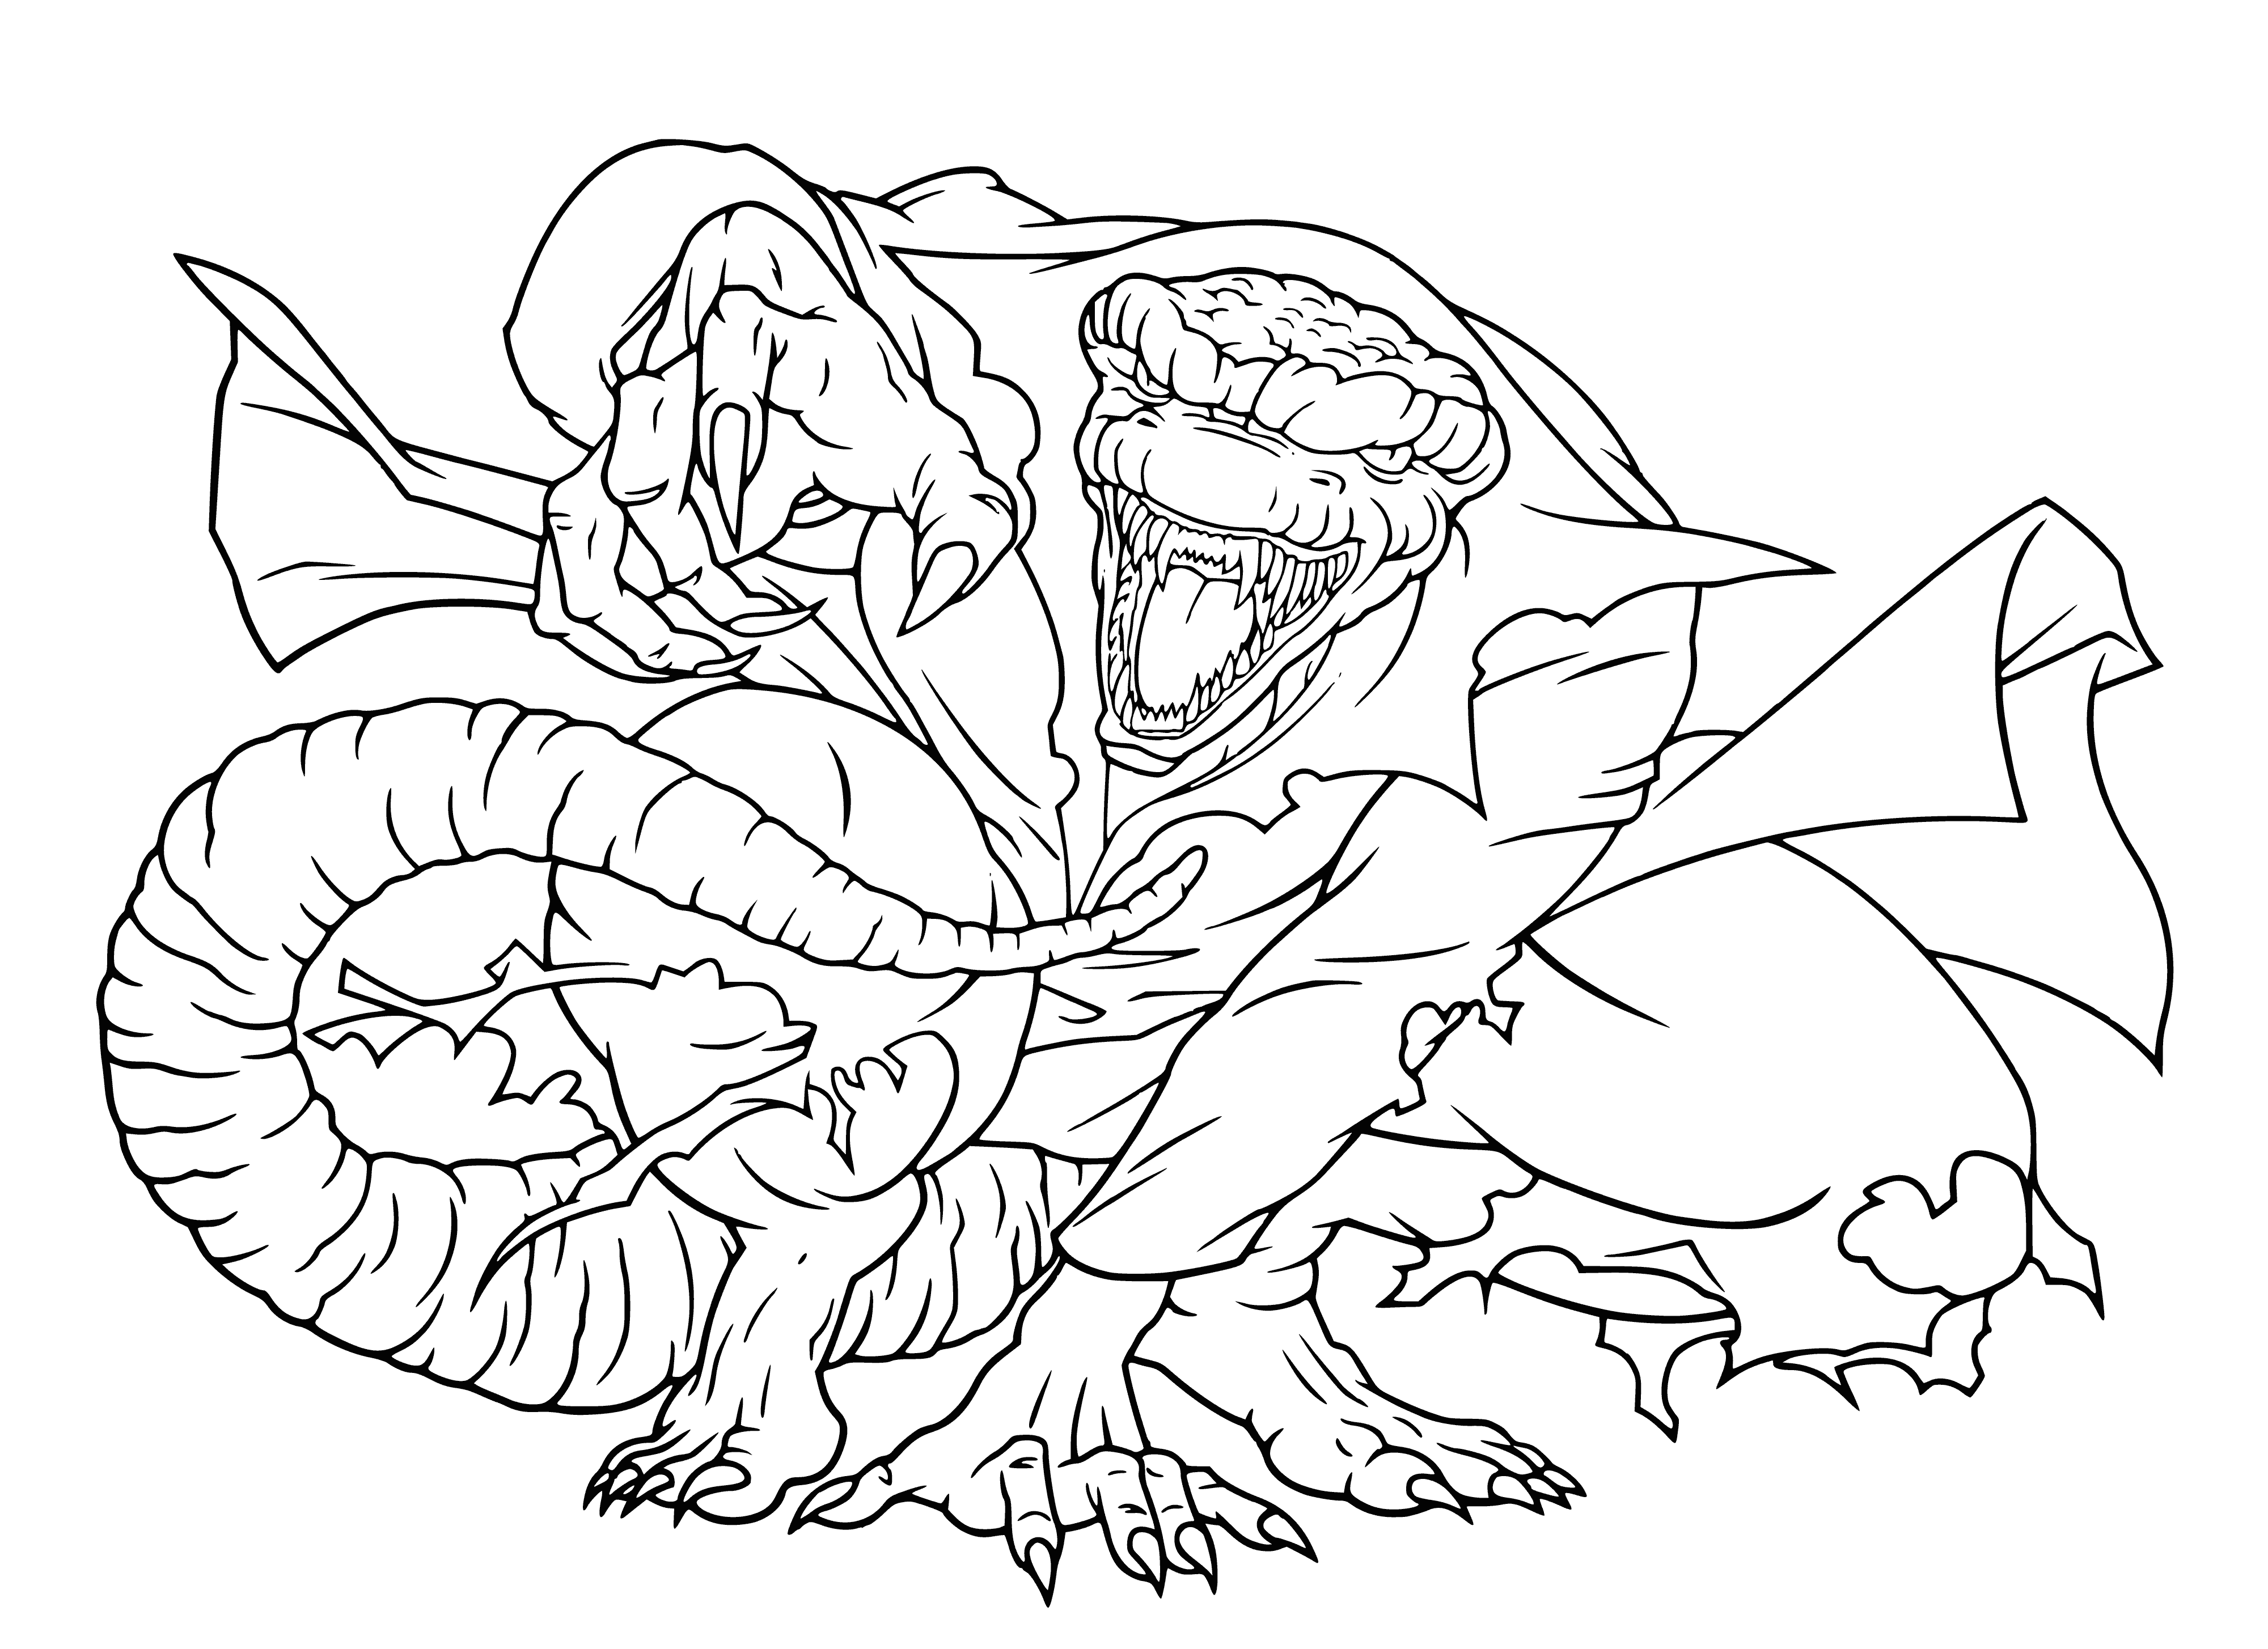 coloring page: Lizard, a big green supervillain with sharp claws, teeth and glowing red eyes, always ready to attack. #spiderman